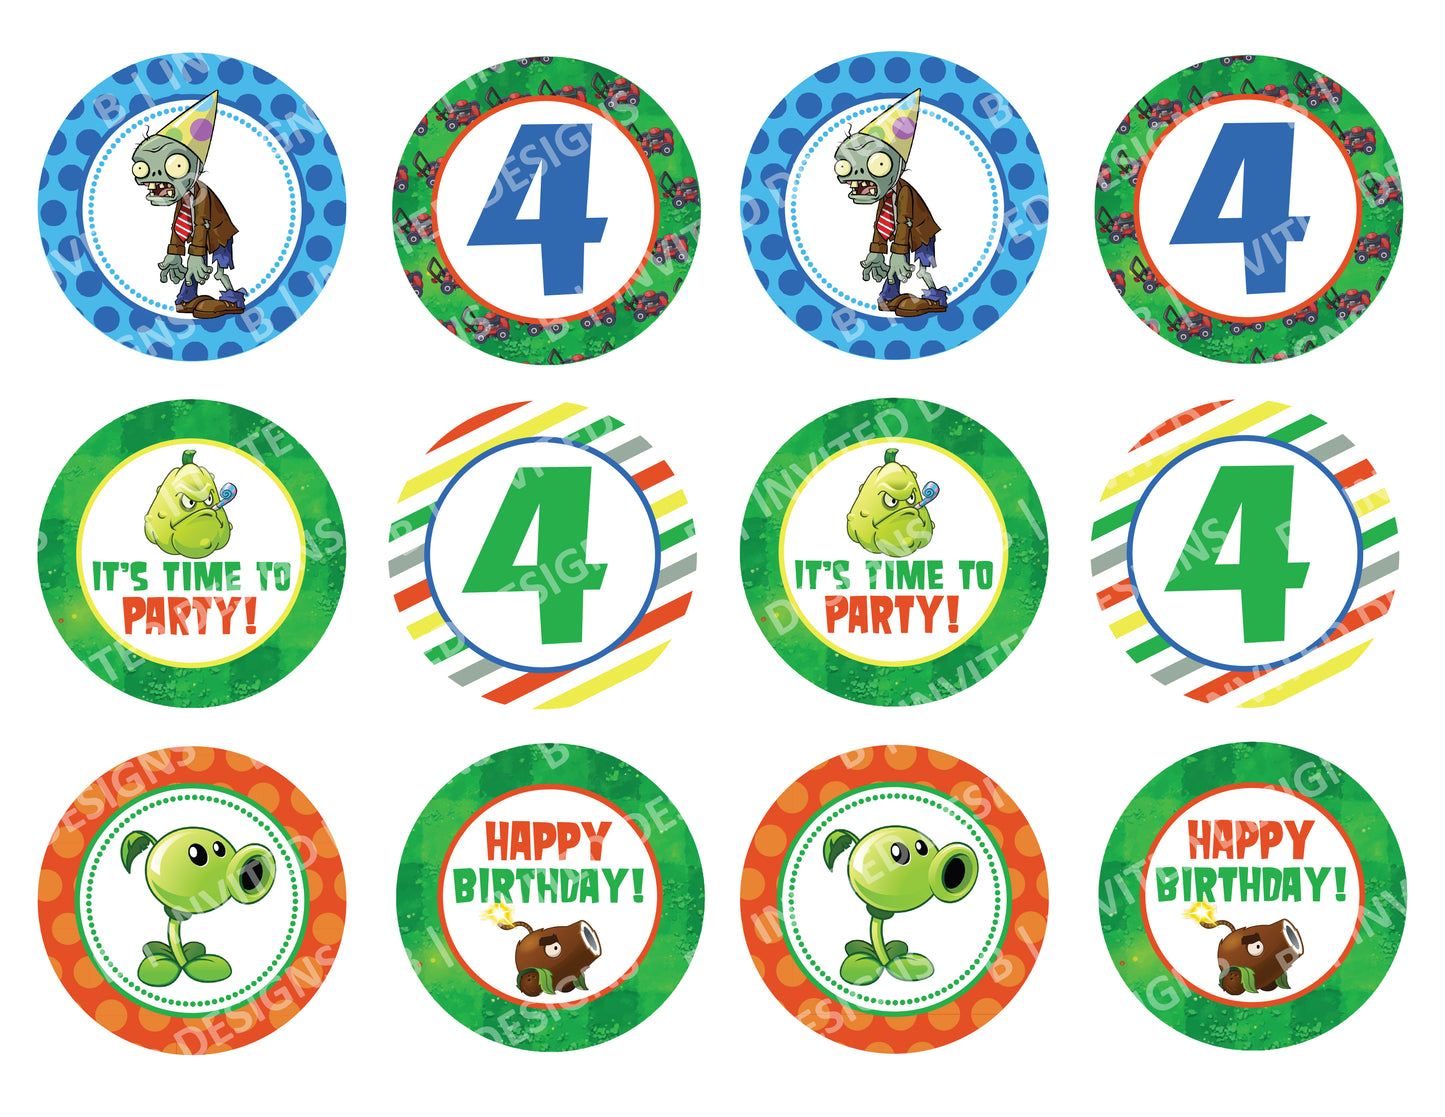 PLANTS VS. ZOMBIES Cupcake Toppers! 2 Inch or 2.5 Inch! Digital OR Printed & Fully Assembled!